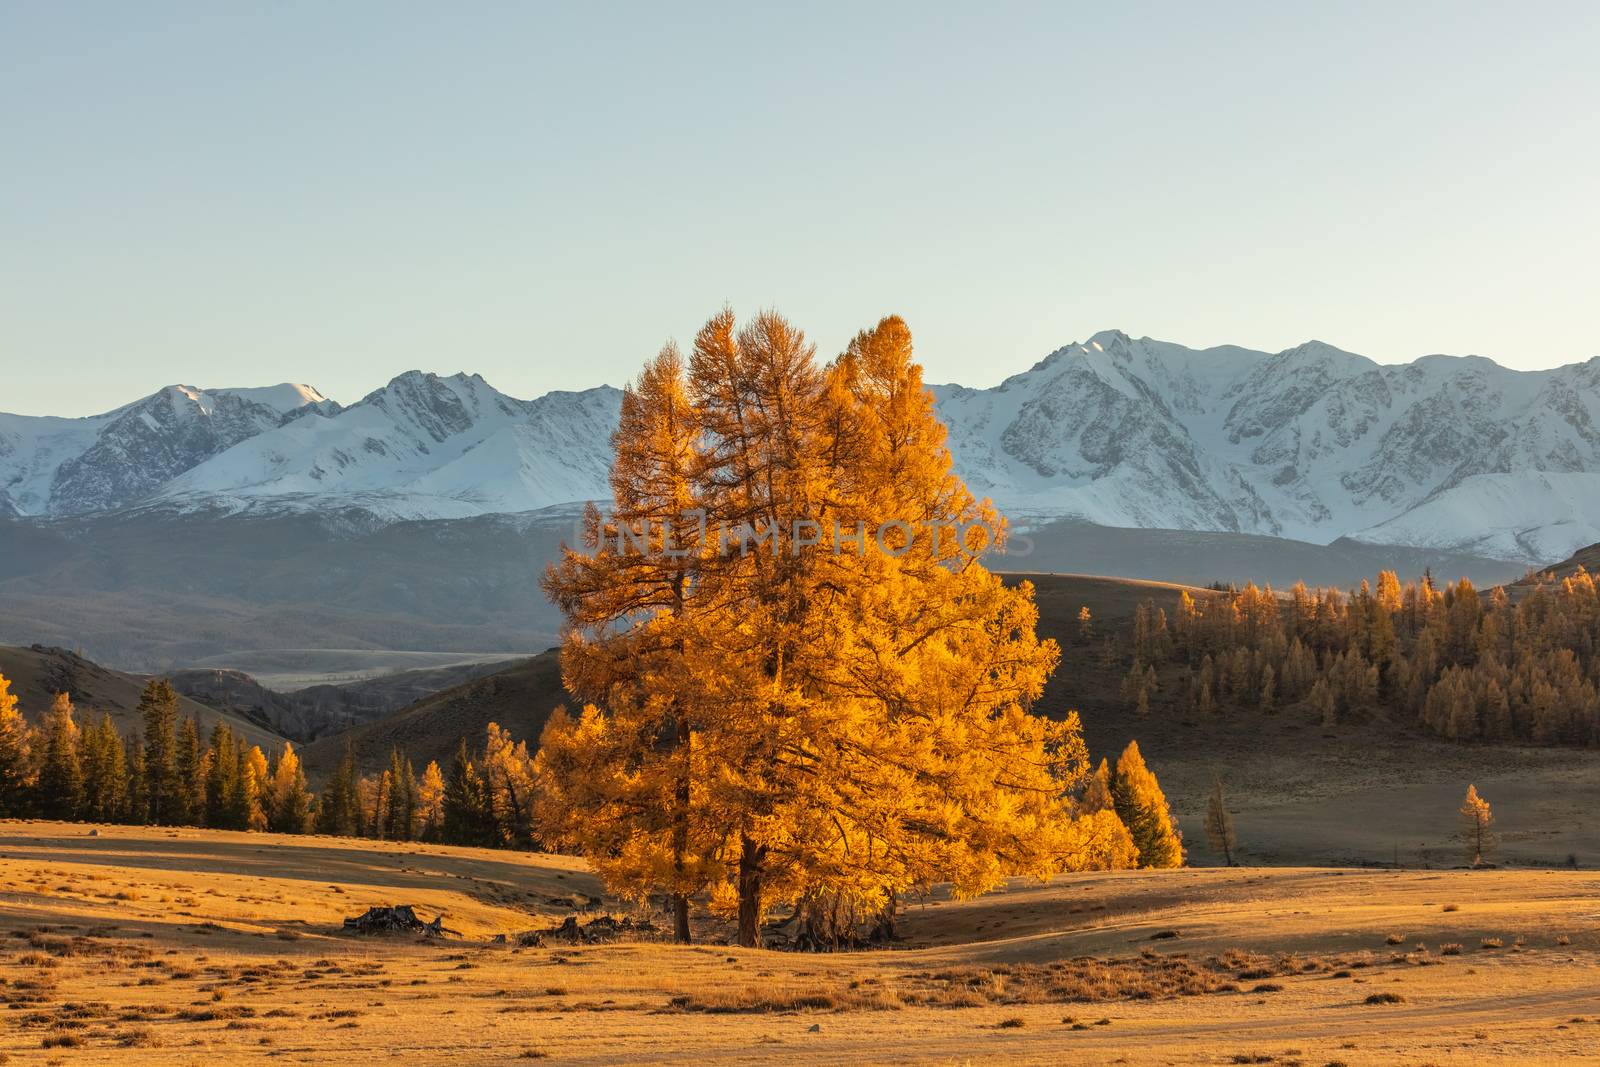 Beautiful shot of a valley full of golden trees and white snowy mountains in the background and a lone tree in the foreground. Fall time. Sunset. Altai mountains, Russia. Golden hour.